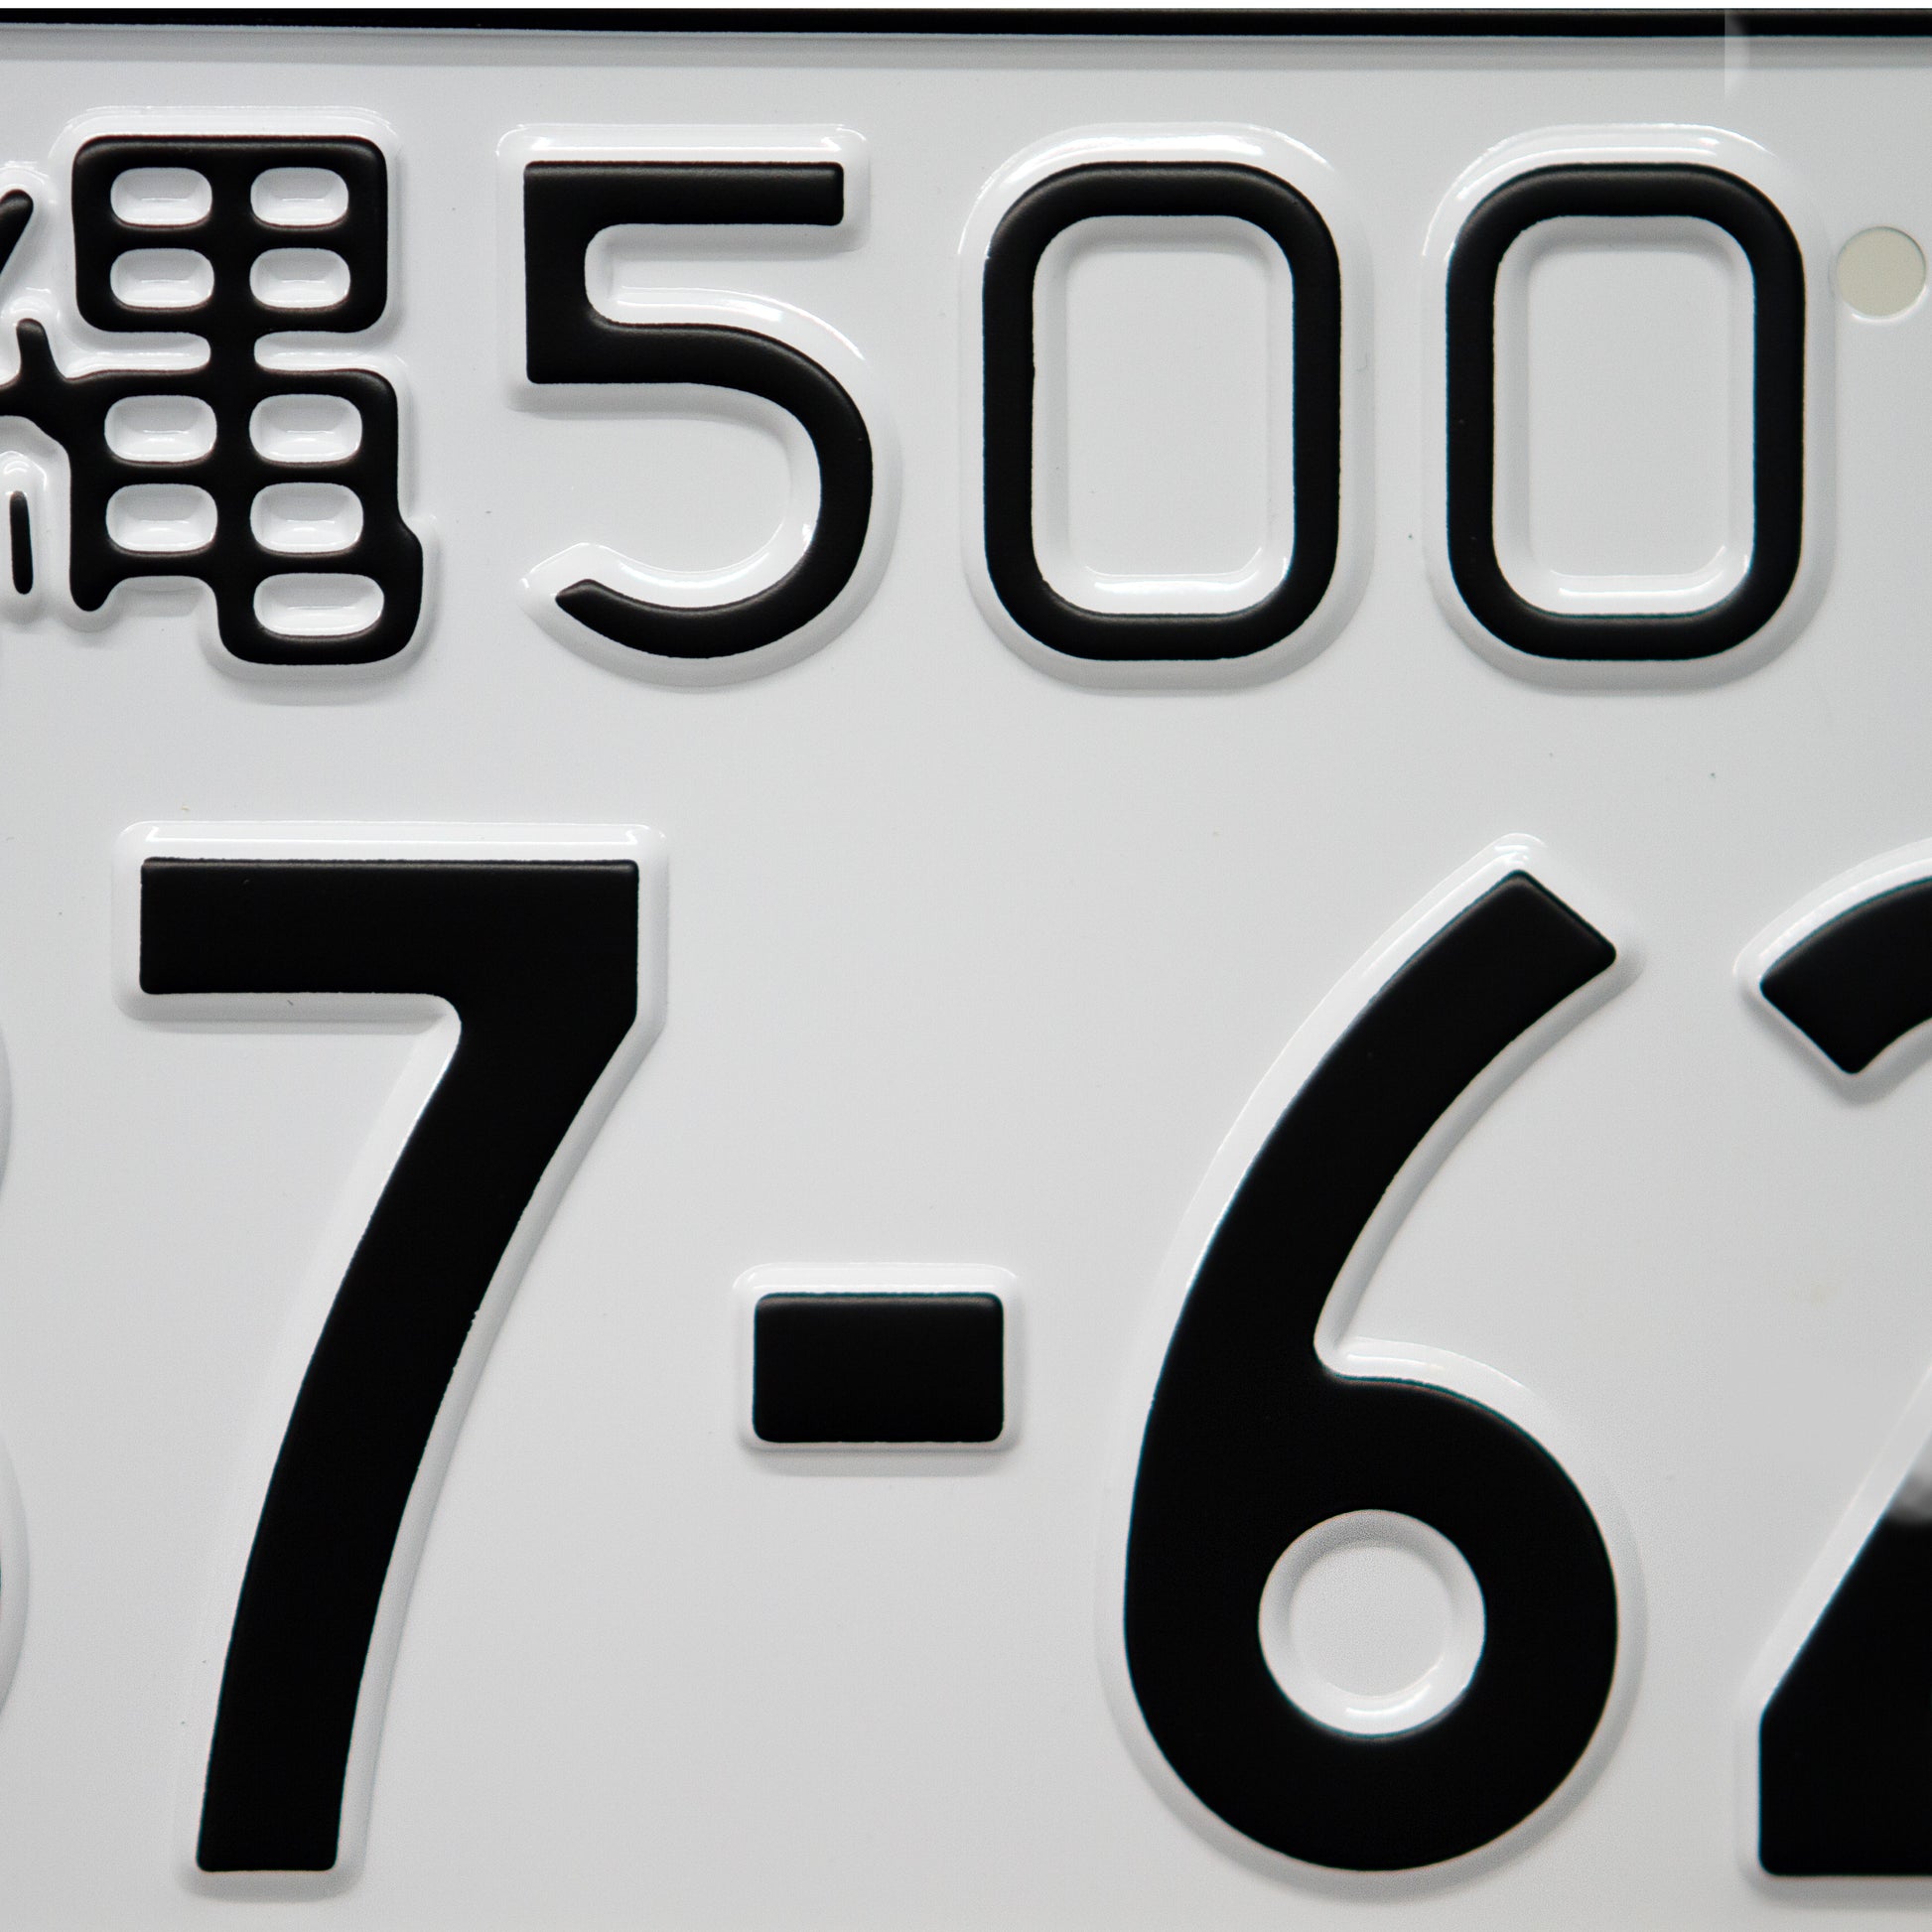 Japanese license plate gloss white with black text closeup